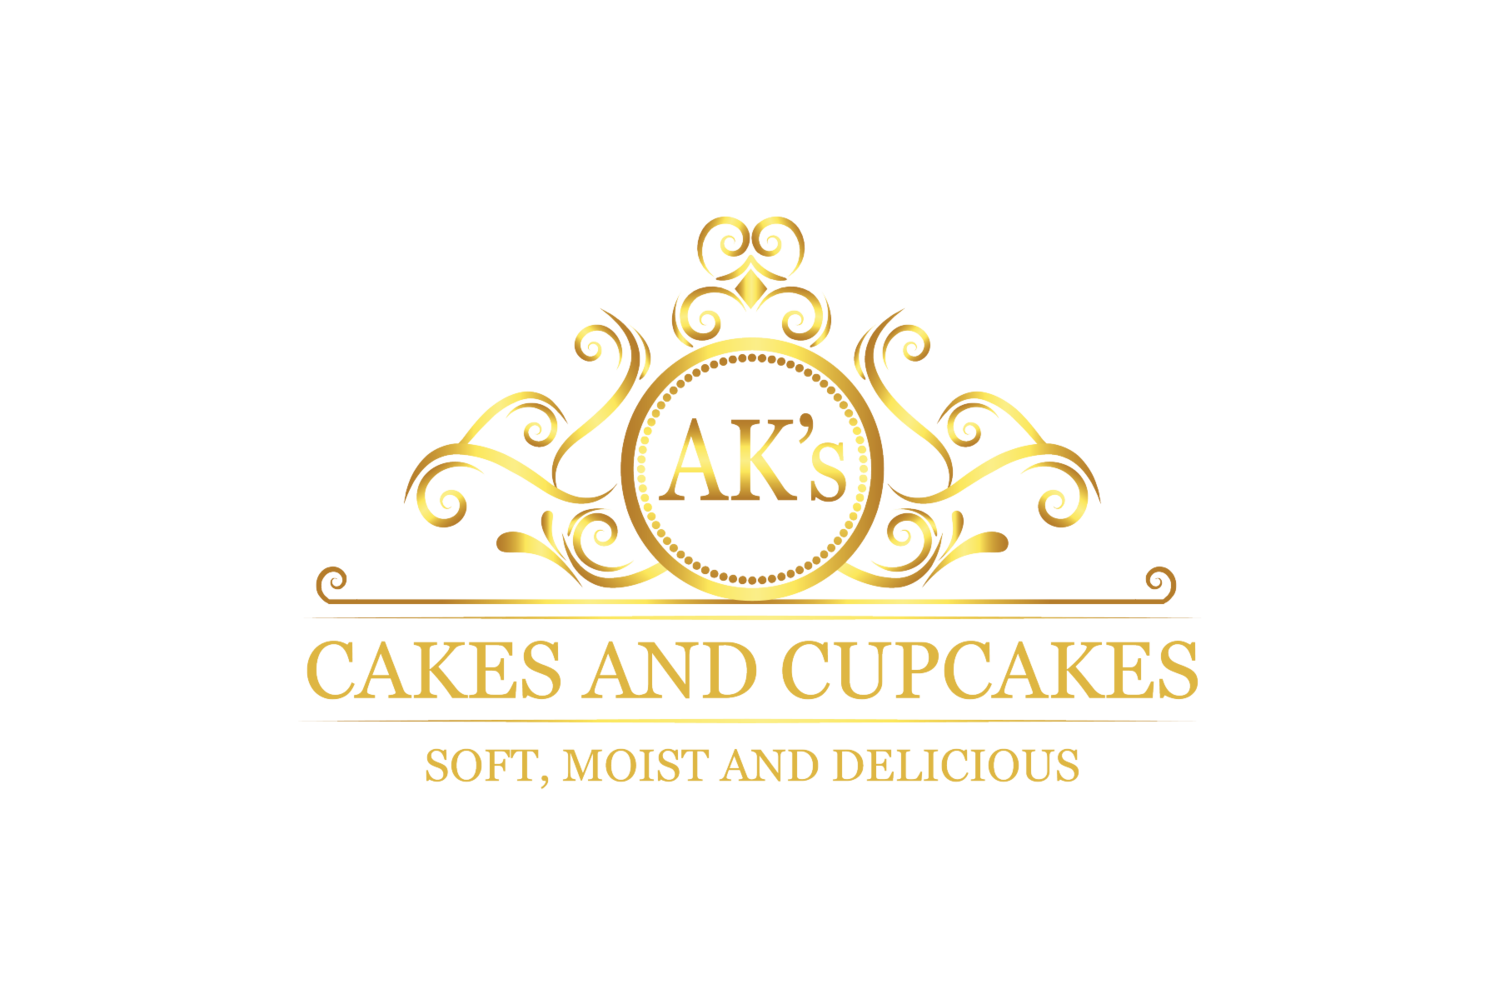 AK's Cakes and Cupcakes